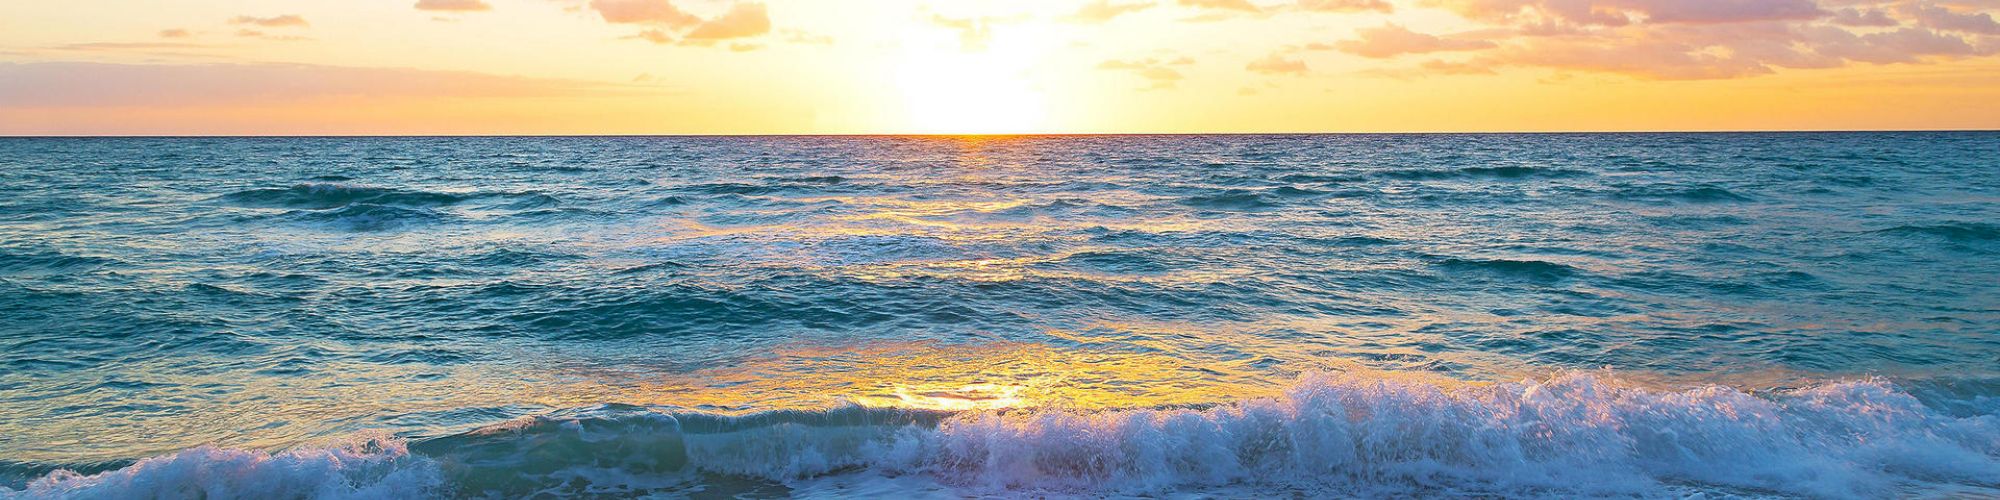 The image shows a sunset over the ocean with waves gently crashing onto a sandy beach, creating a serene and picturesque scene.